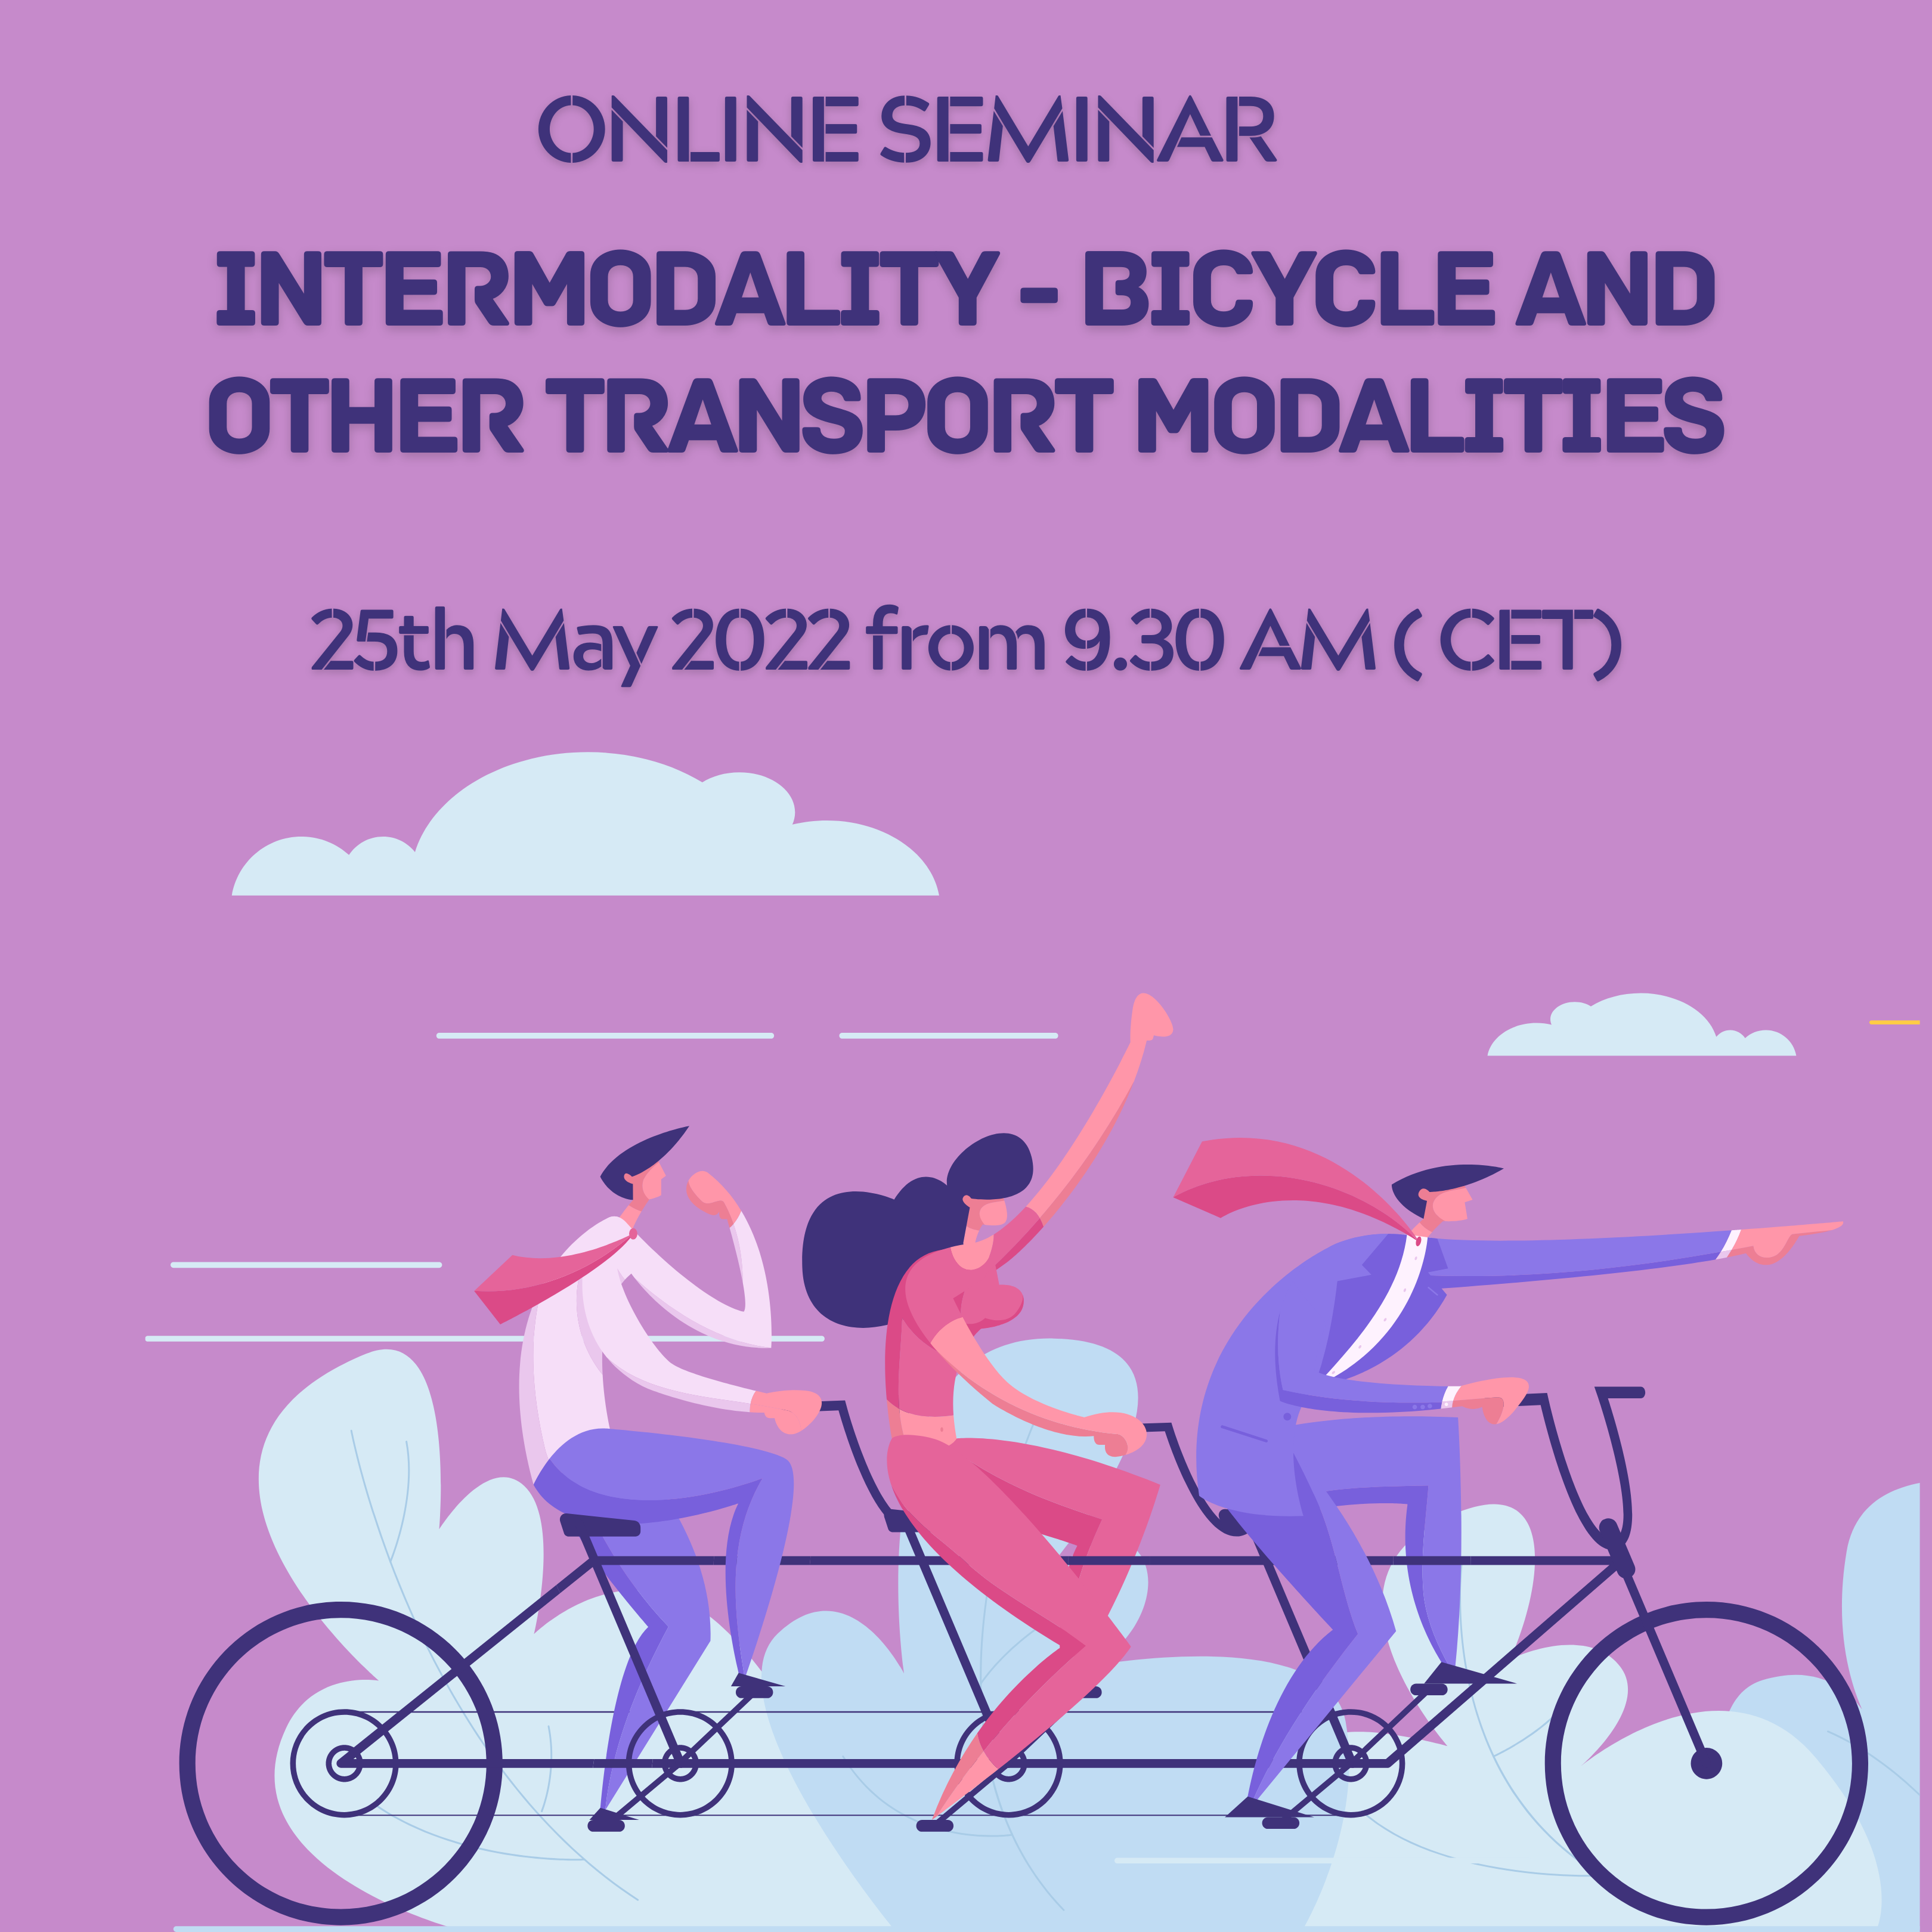 INTERMODALITY - BICYCLE & OTHER TRANSPORT MODALITIES